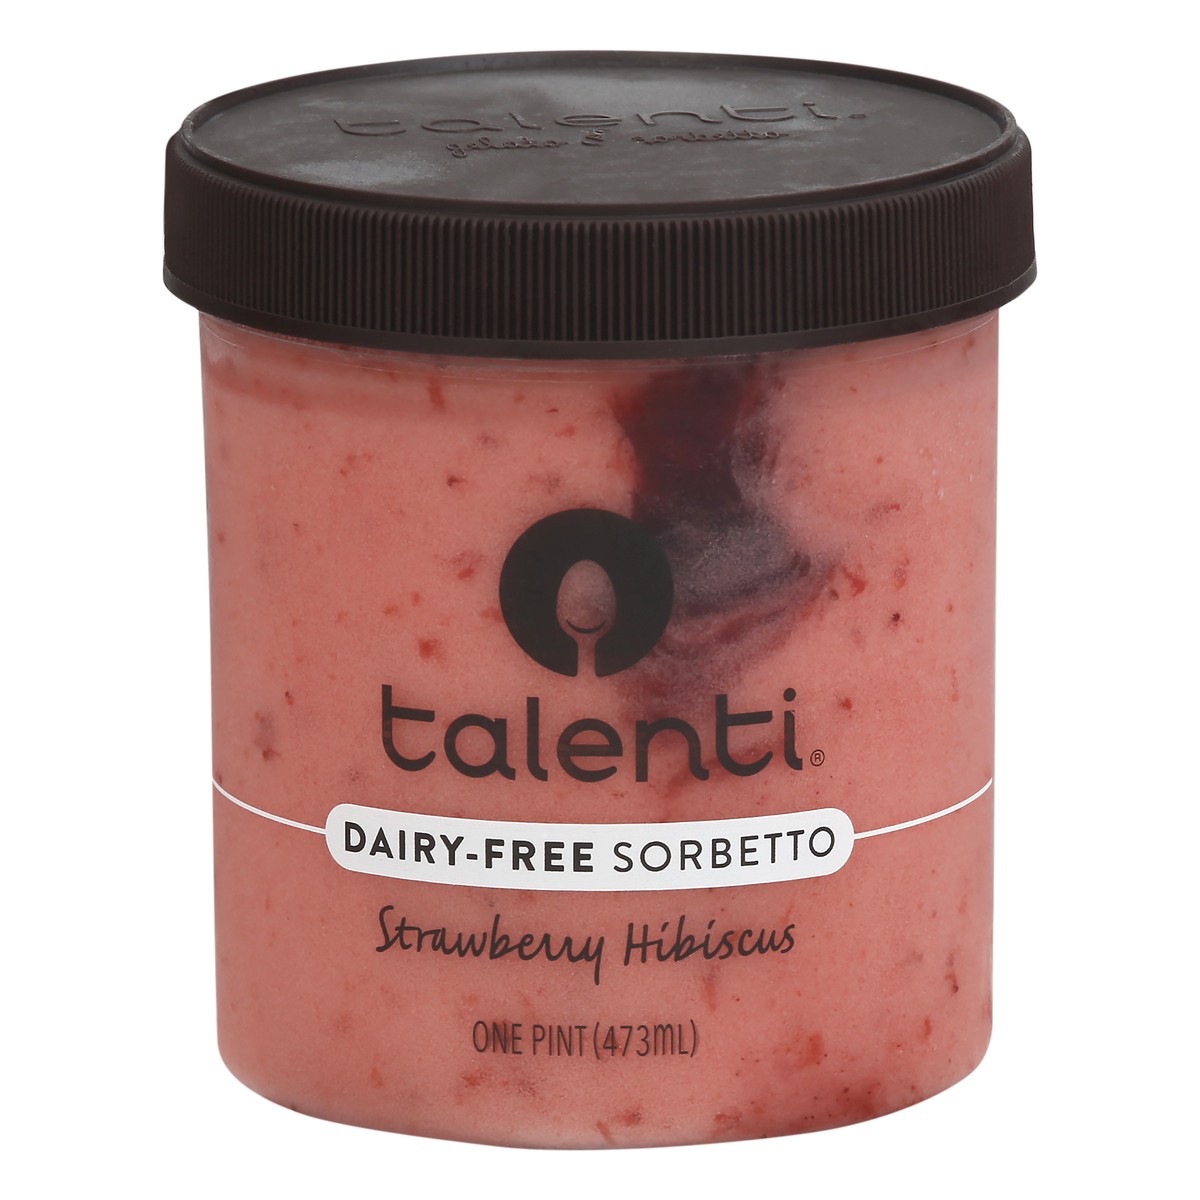 slide 1 of 12, Talenti Dairy-Free Sorbetto Strawberry Hibiscus, 1 pint, 1 pint